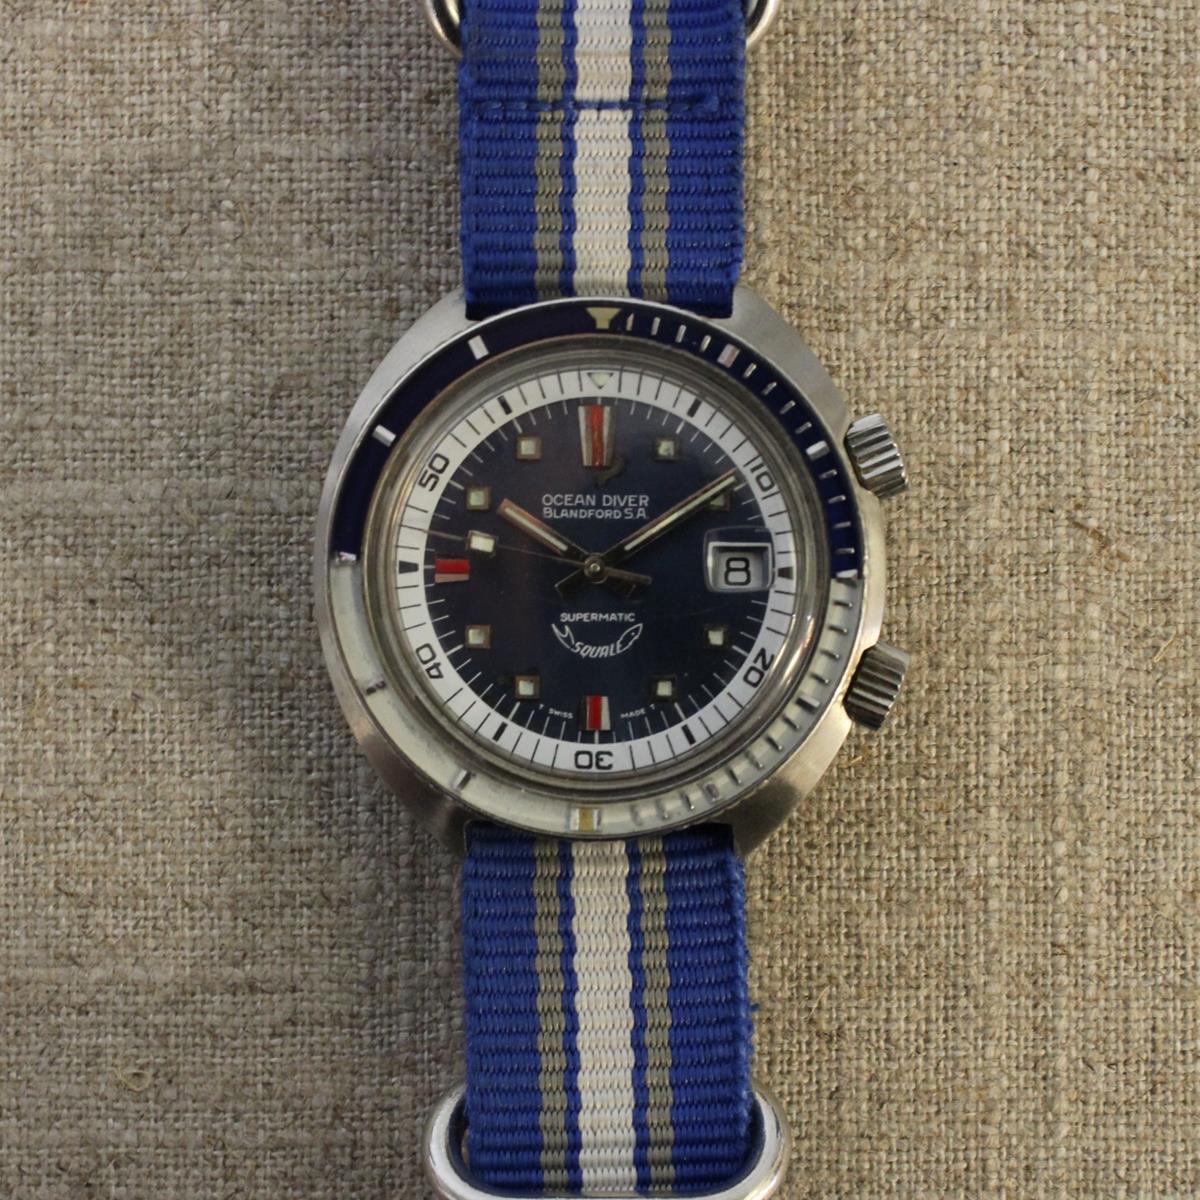 Vintage Stainless Steel Squale Diving Watch